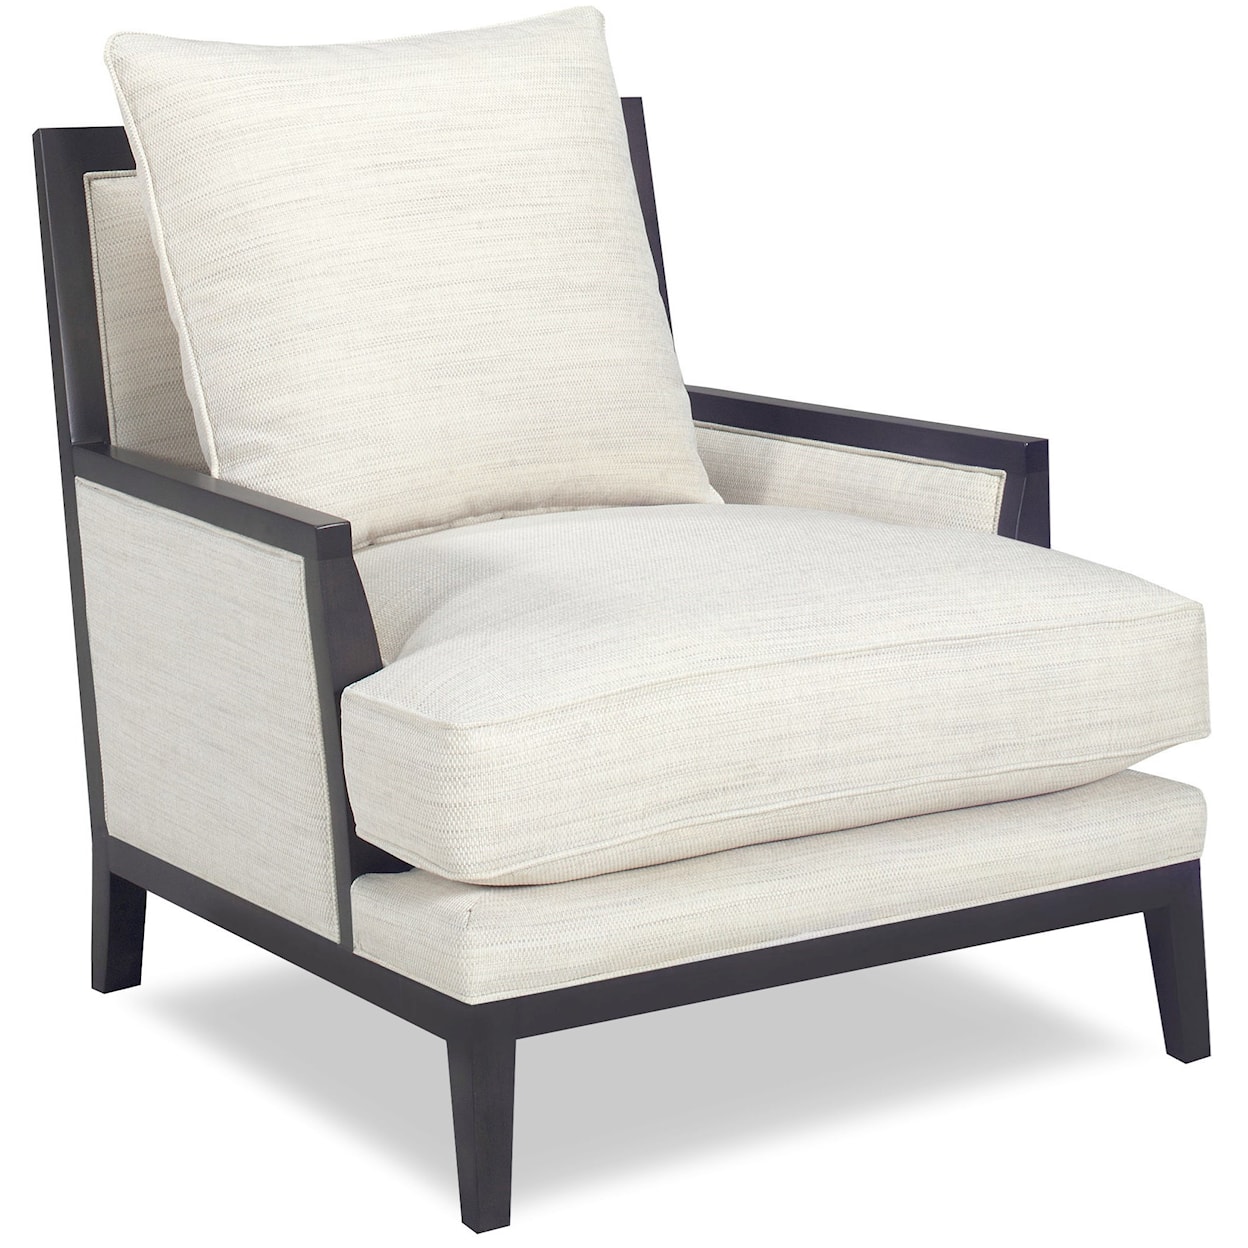 Temple Furniture Hunk Upholstered Chair